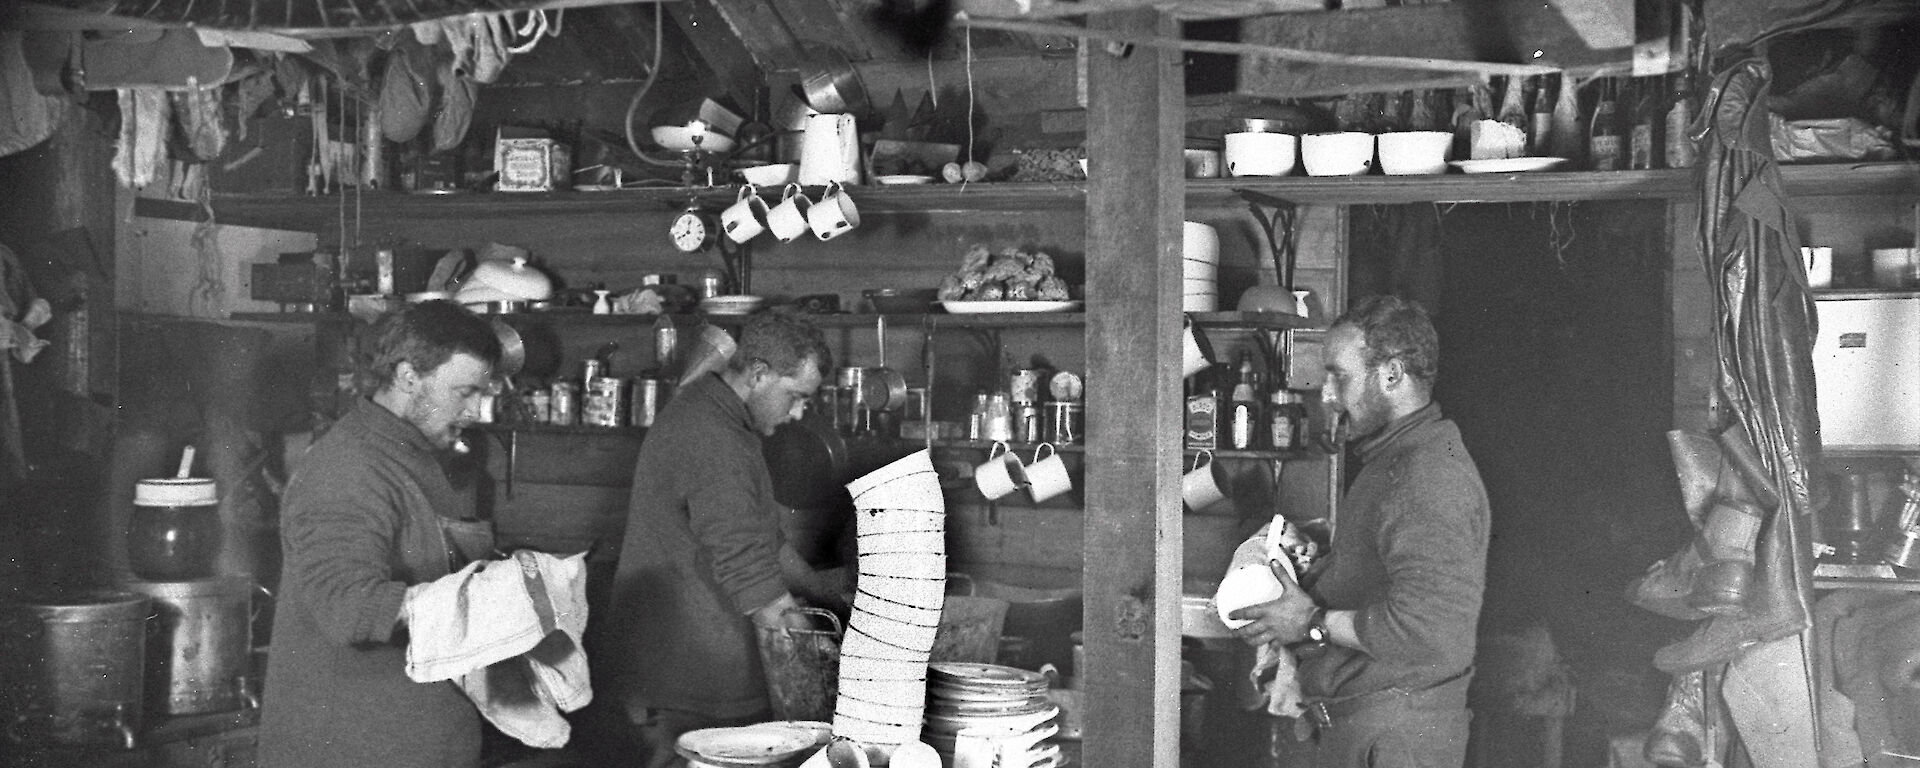 John Hunter (left), Alfred Hodgeman and ‘Robert’ Bage wash up in the living quarters of the Main Hut, 1912.